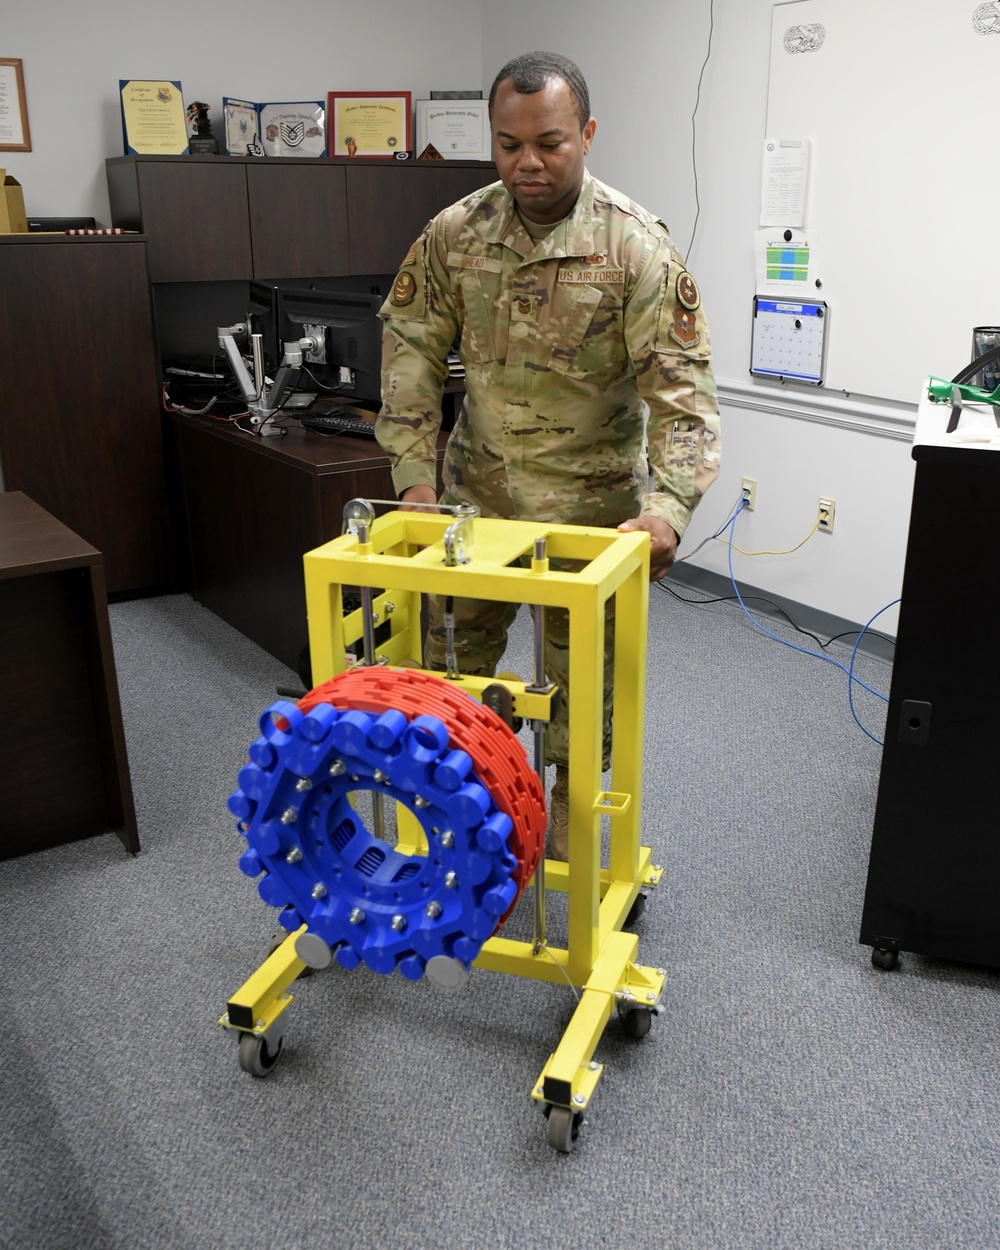 Robins Airman working to bring innovative tool to Air Force